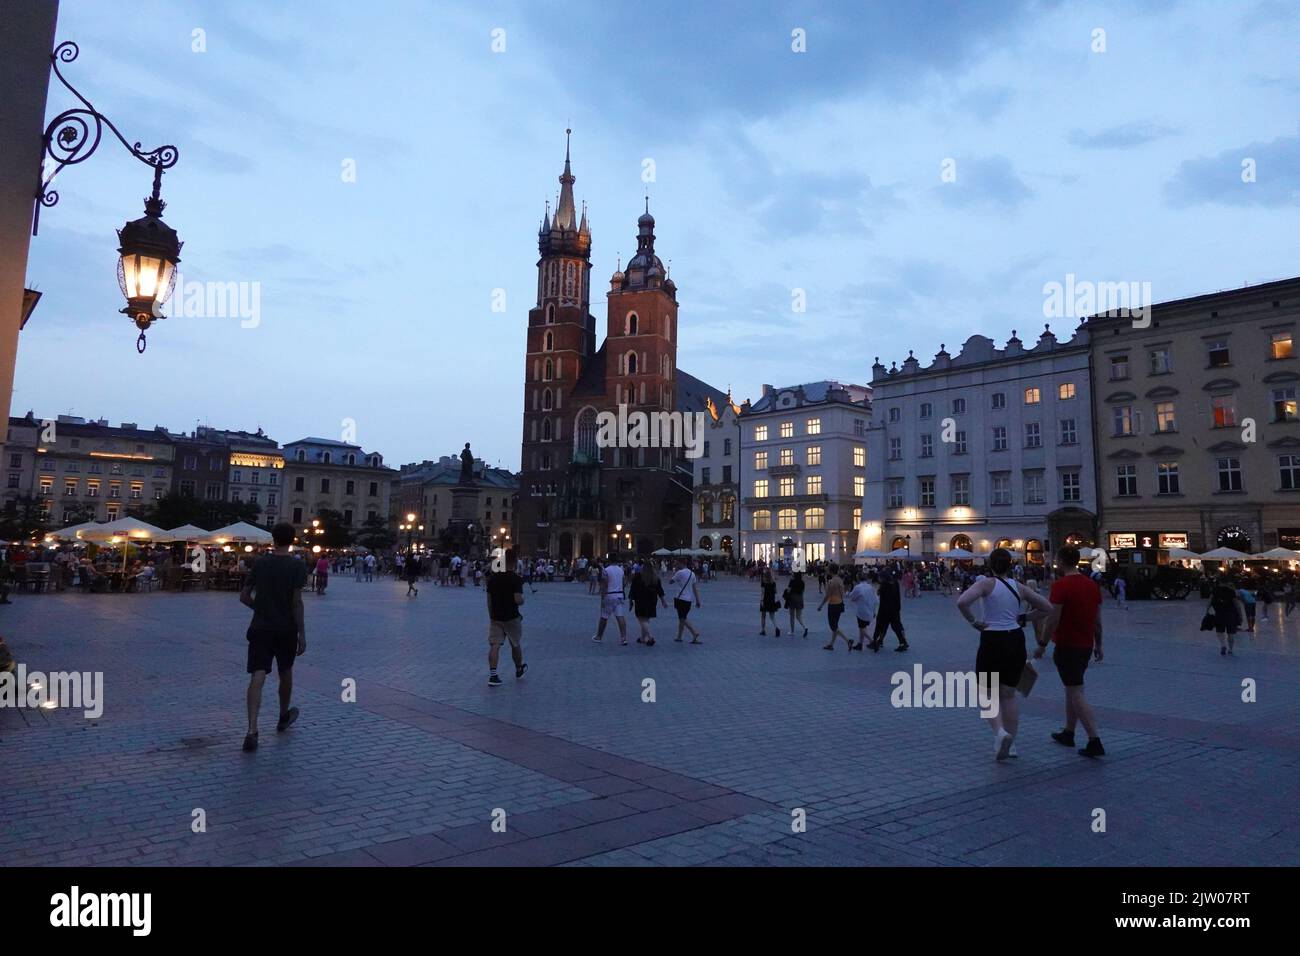 The main square in Krakow old town, Poland, Europe Stock Photo